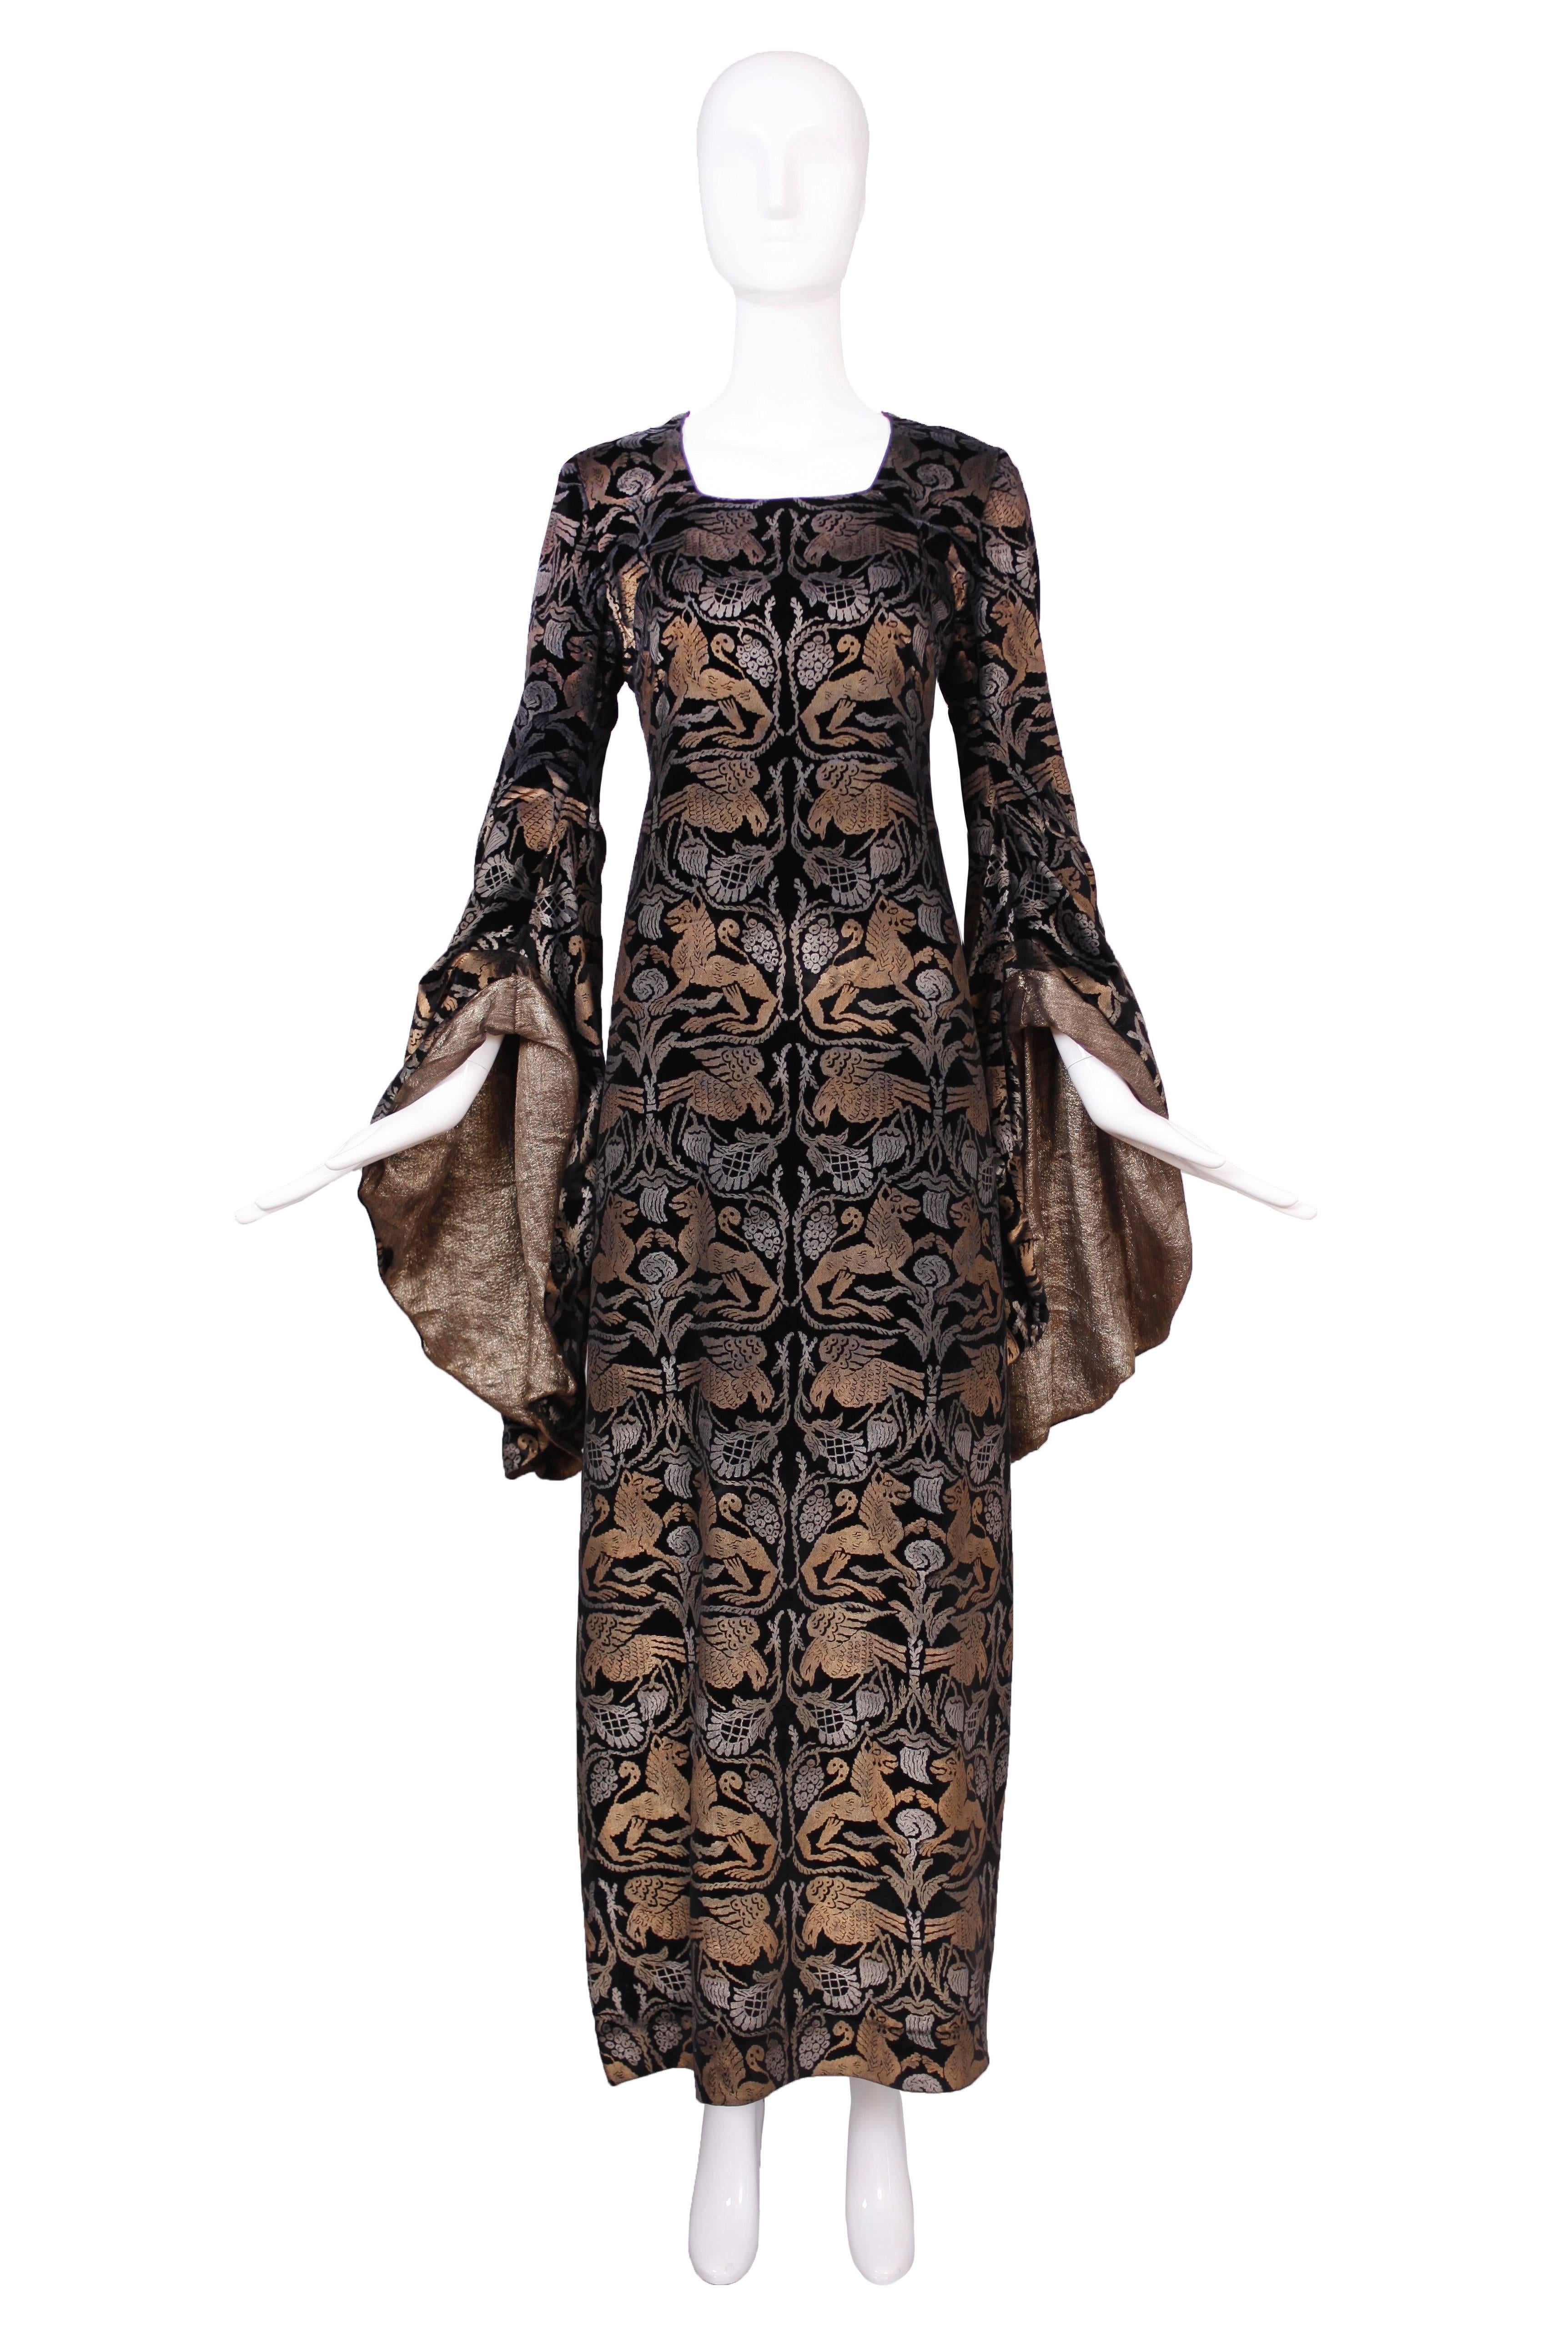 1920's Maria Gallenga couture velvet novelty gown printed with a stenciled silver and copper/gold repeating pattern depicting mythical creatures. The floor length gown features dramatic gold lame-lined trumpet sleeves and is lined in silk. The dress